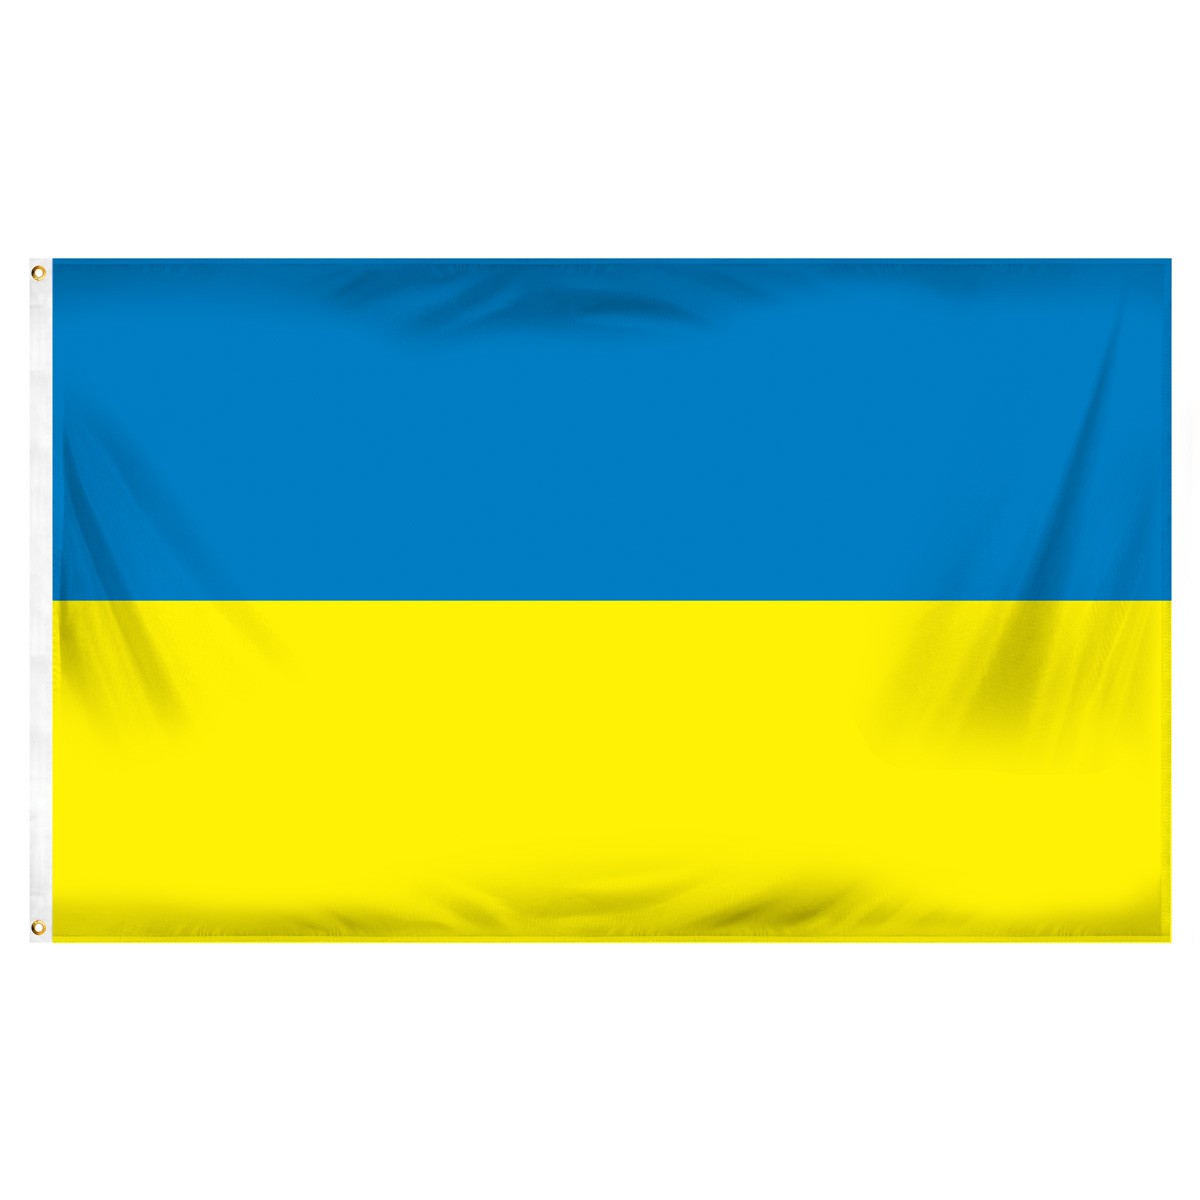 Ukraine Building Pennants and Flags